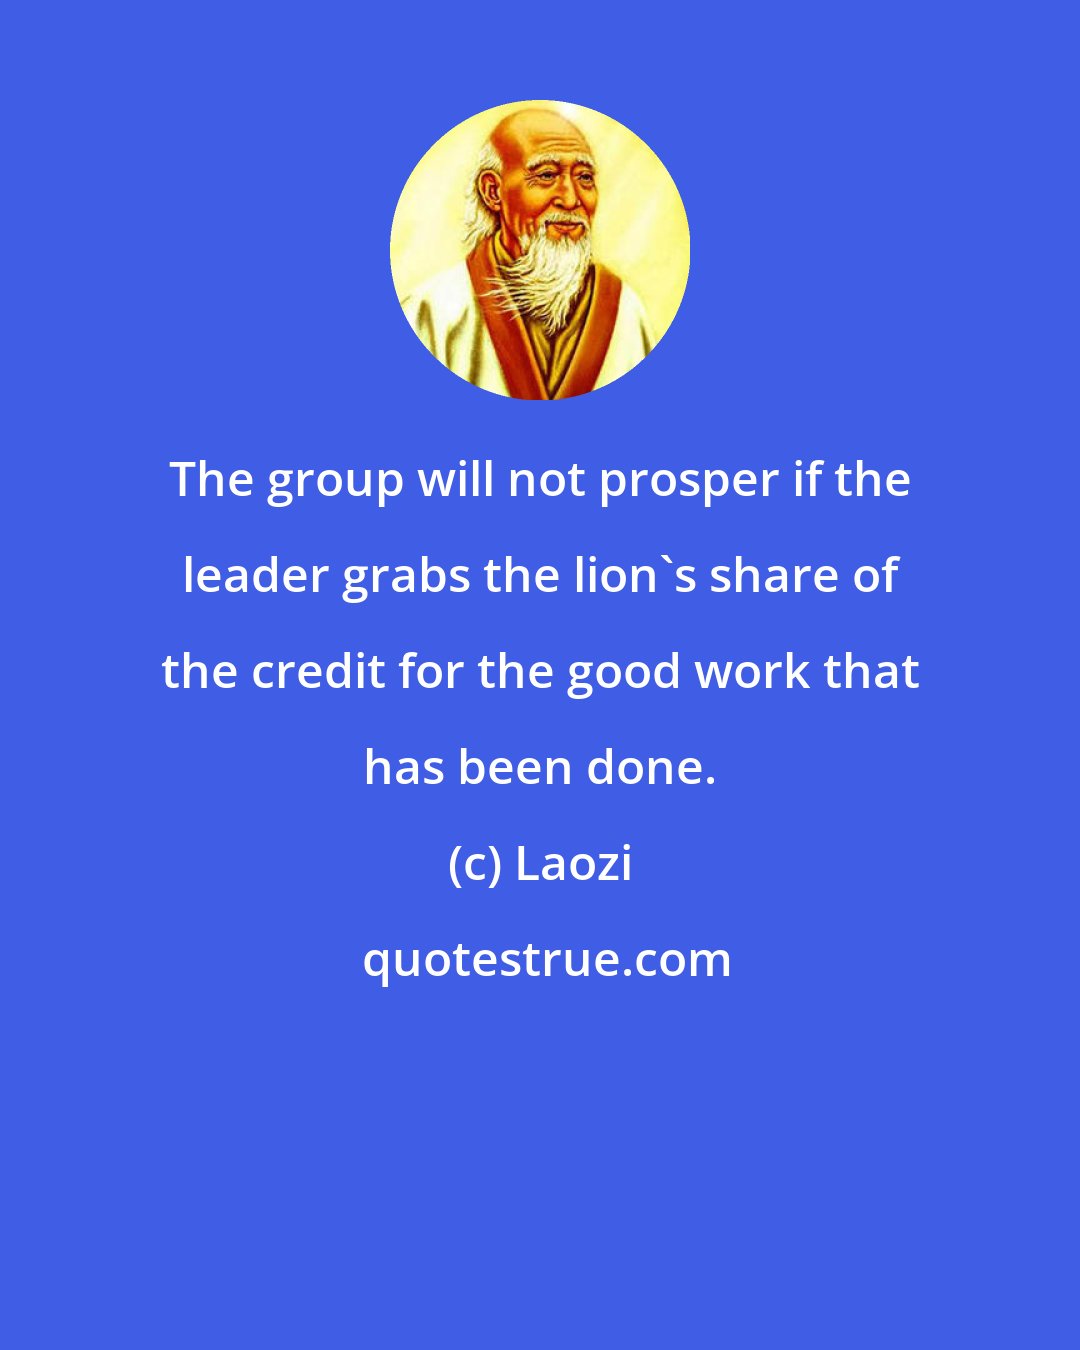 Laozi: The group will not prosper if the leader grabs the lion's share of the credit for the good work that has been done.